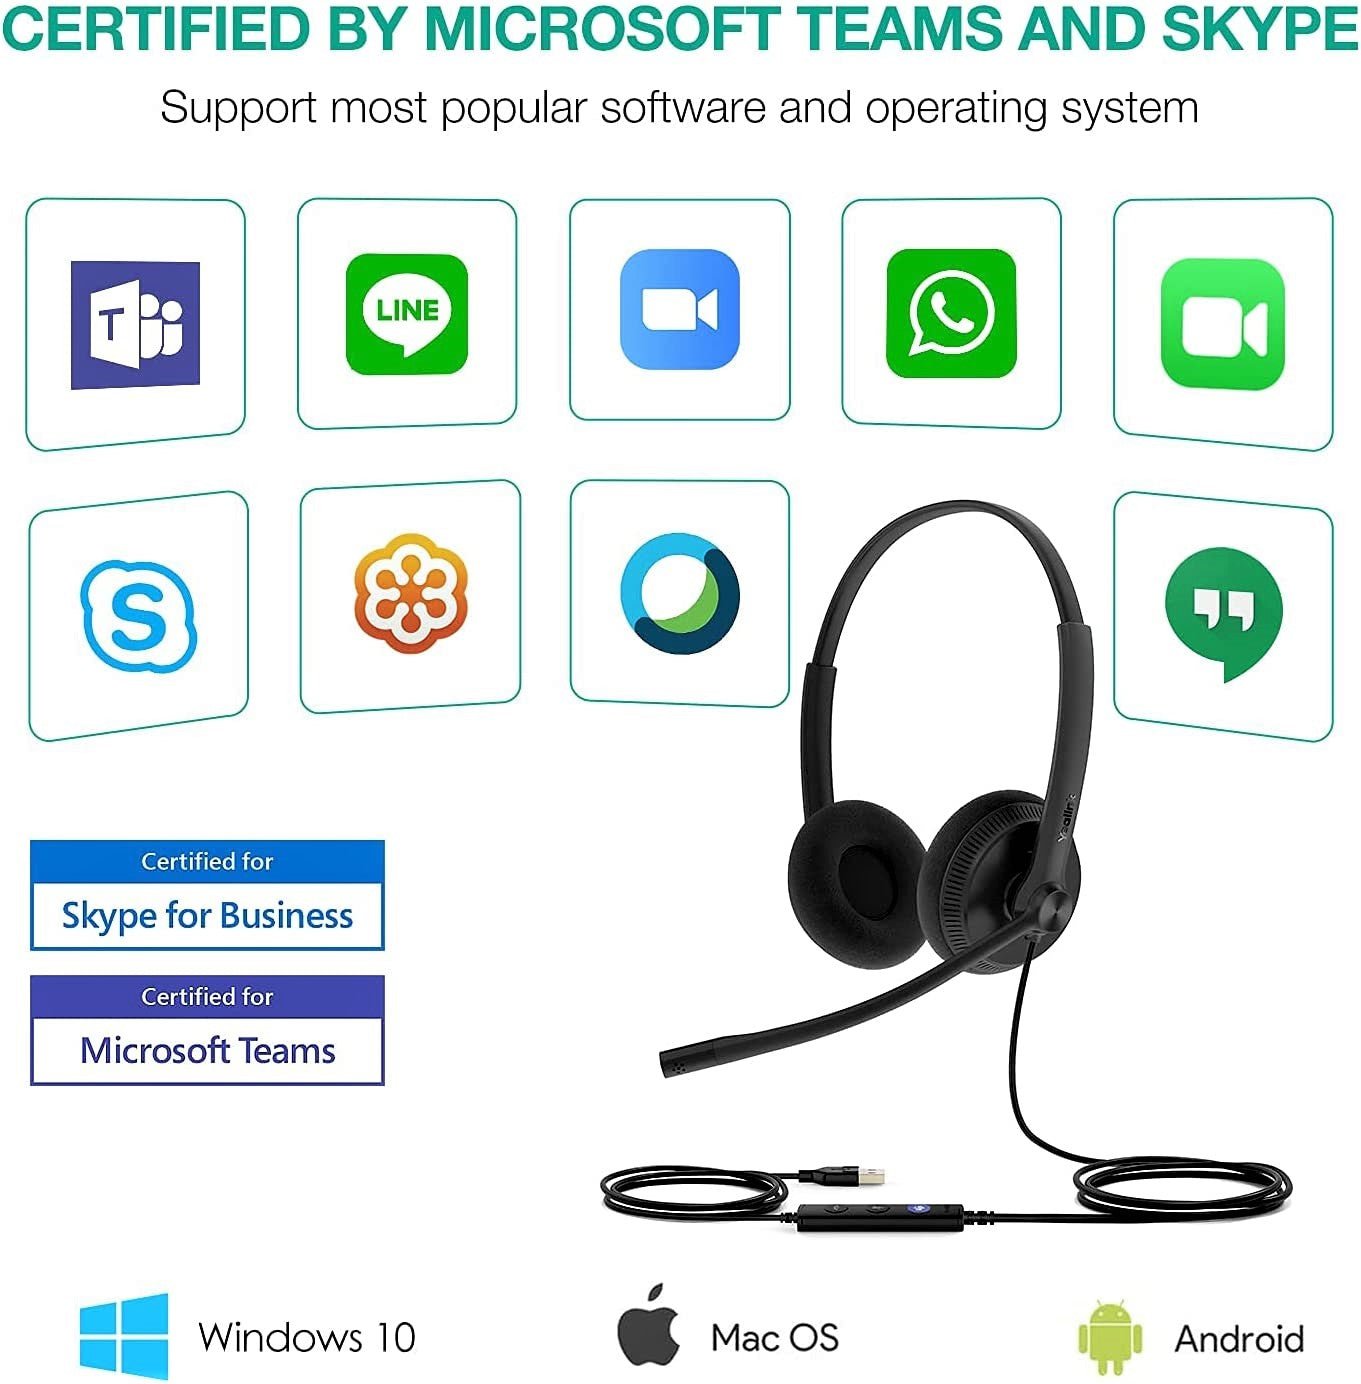 Yealink Headset with Microphone USB Headset Computer Headset PC Laptop Headset Teams Certified UH34 Wired Noise Cancelling with Mic Stereo for Microsoft Optimized